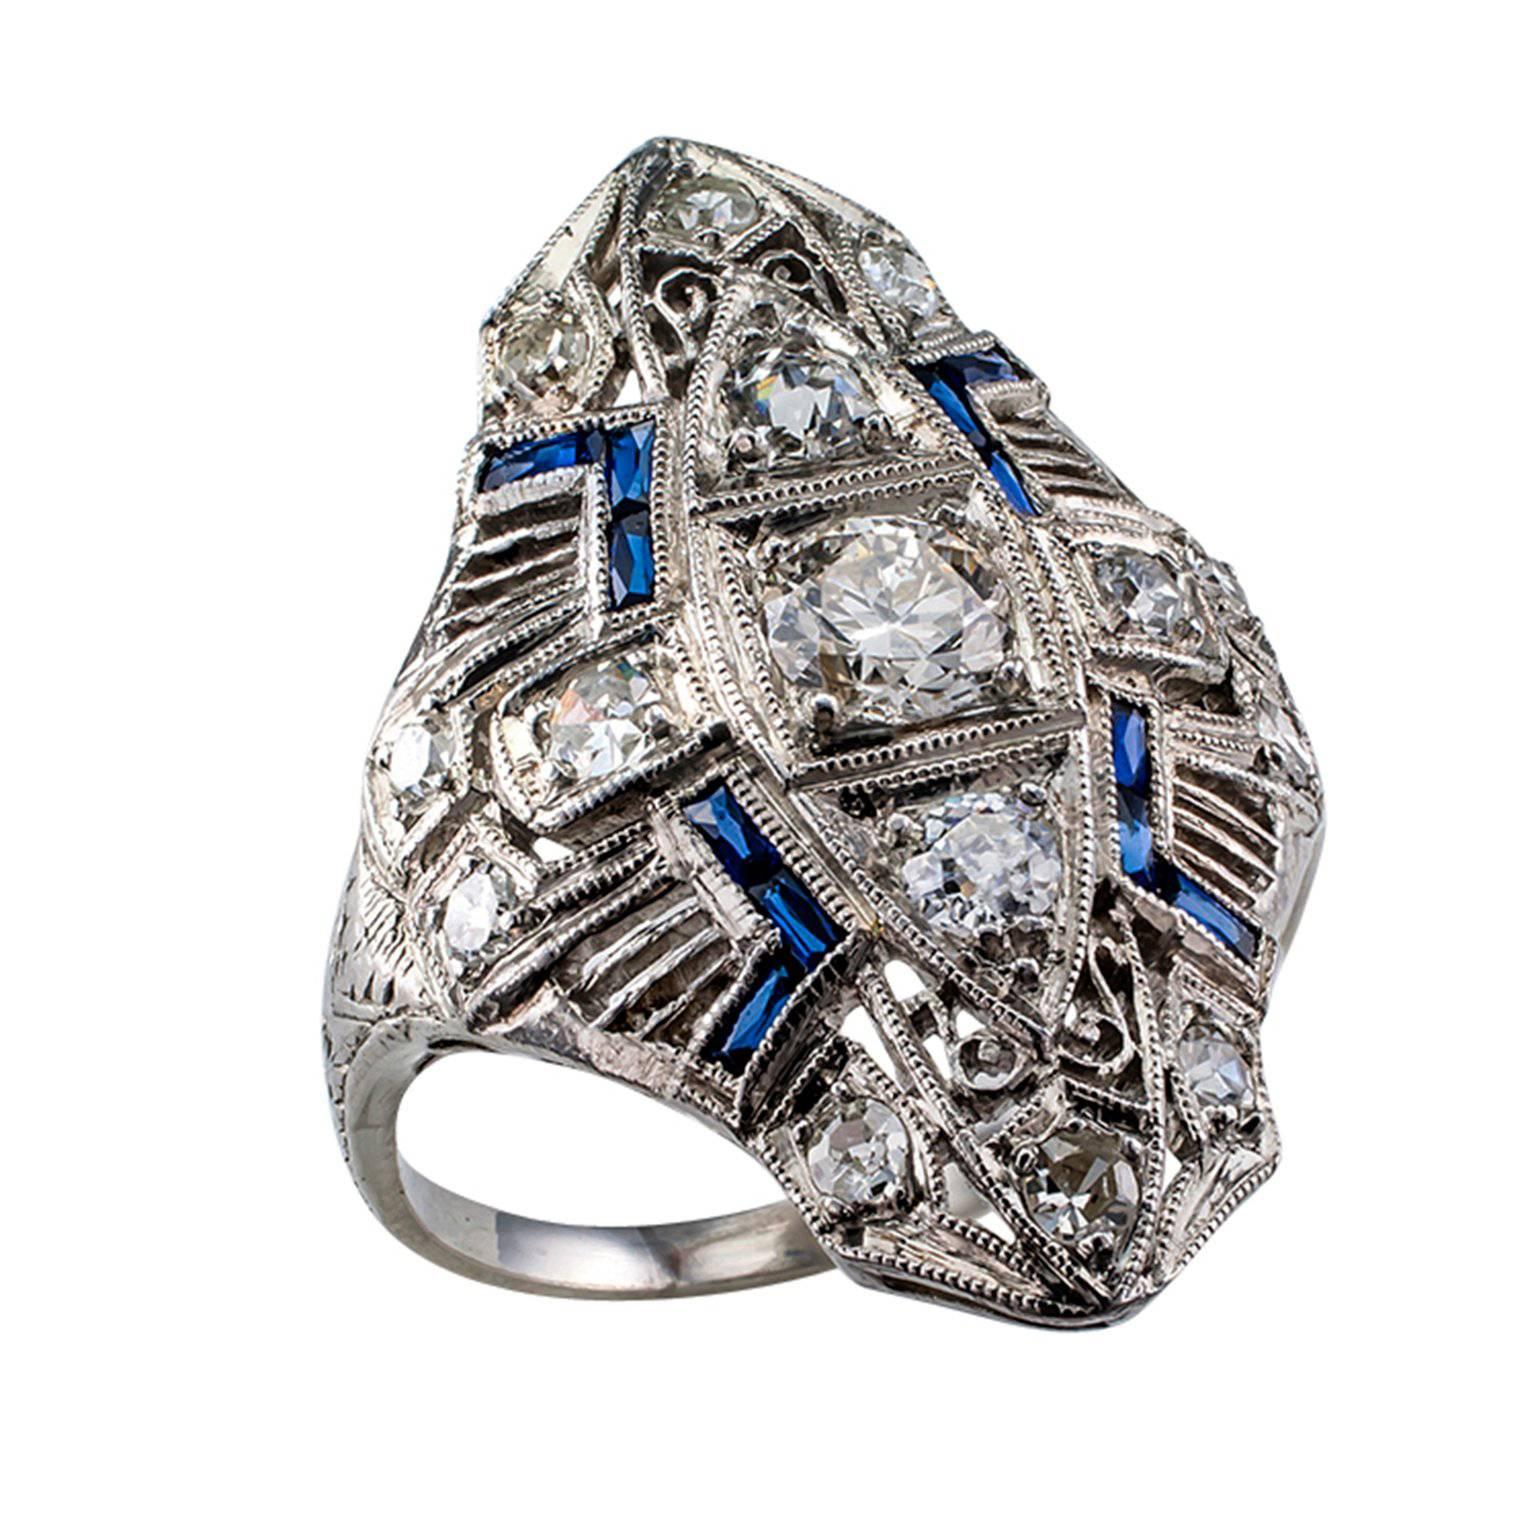 Art Deco platinum and diamond dinner ring

Genuine Art Deco platinum and diamond dinner ring set with fifteen round diamonds totaling approximately 0.85 carat, approximately H - K color and VS - SI clarity, circa 1925.  With its trio larger